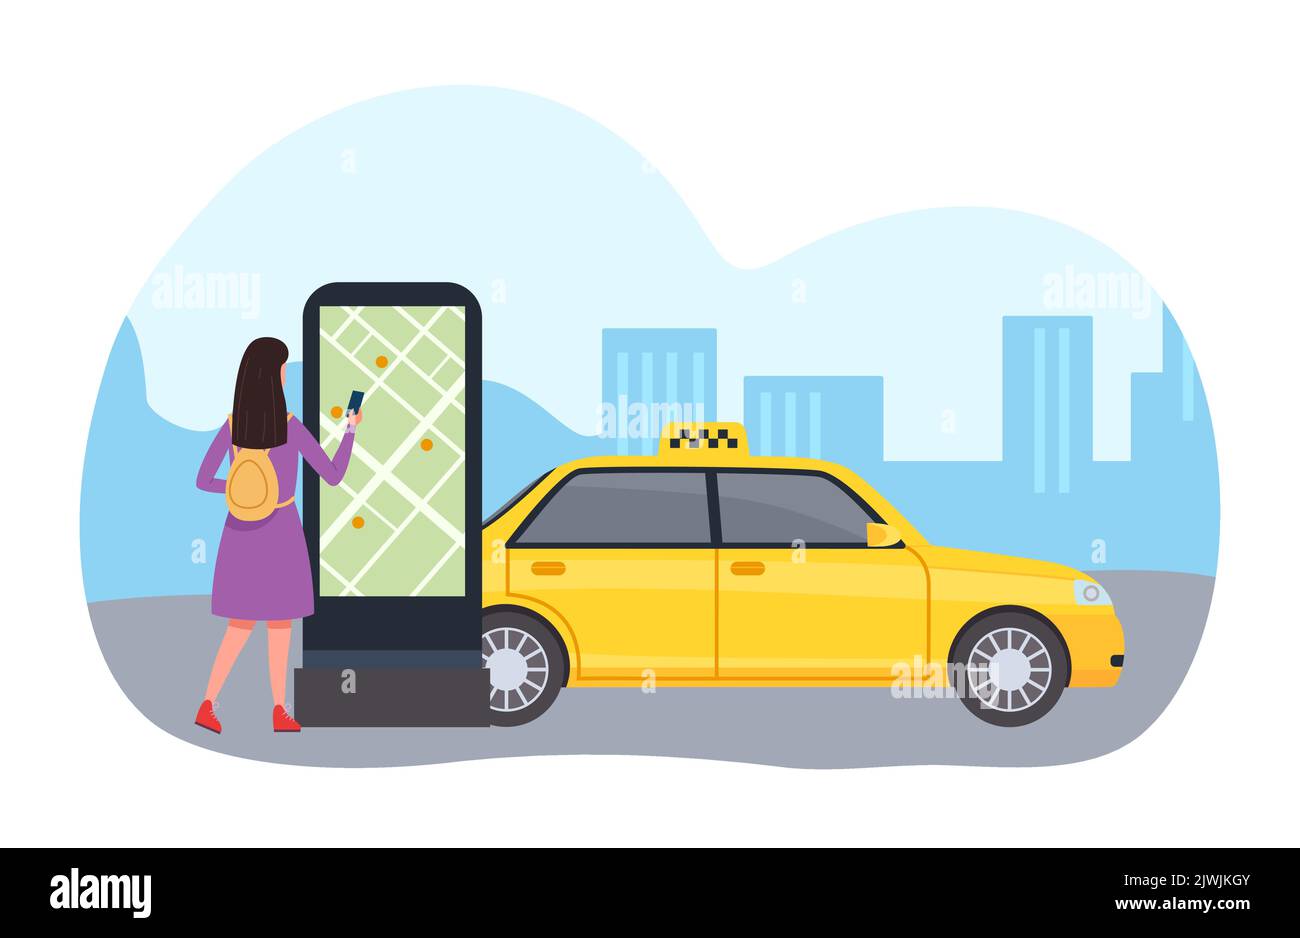 Online service taxi application with map location Stock Vector